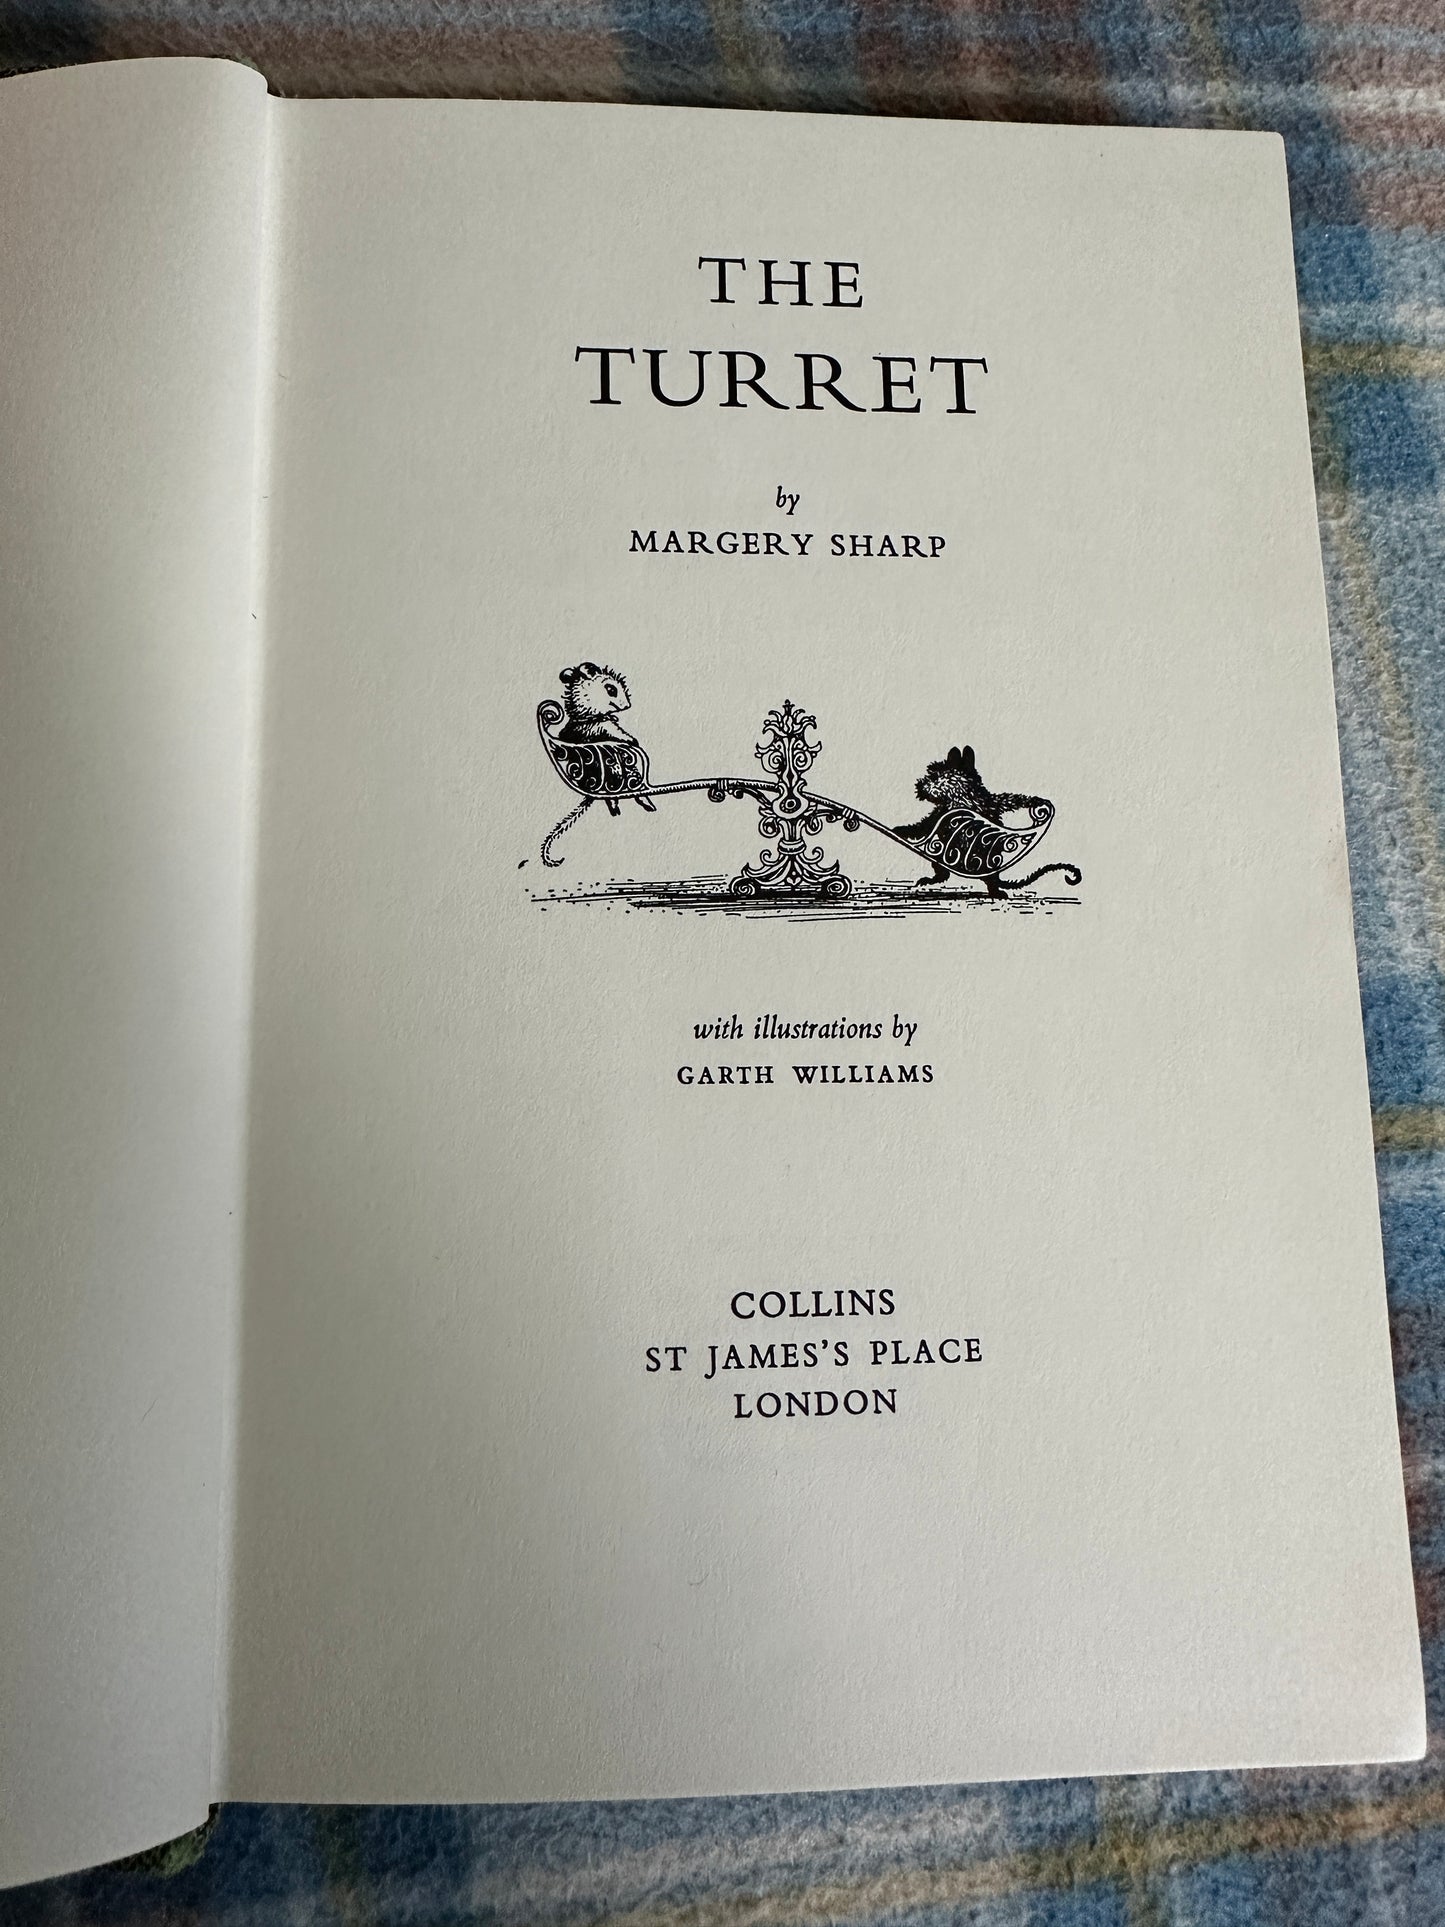 1978 The Turret - Margery Sharp(Garth Williams illustration)Collins